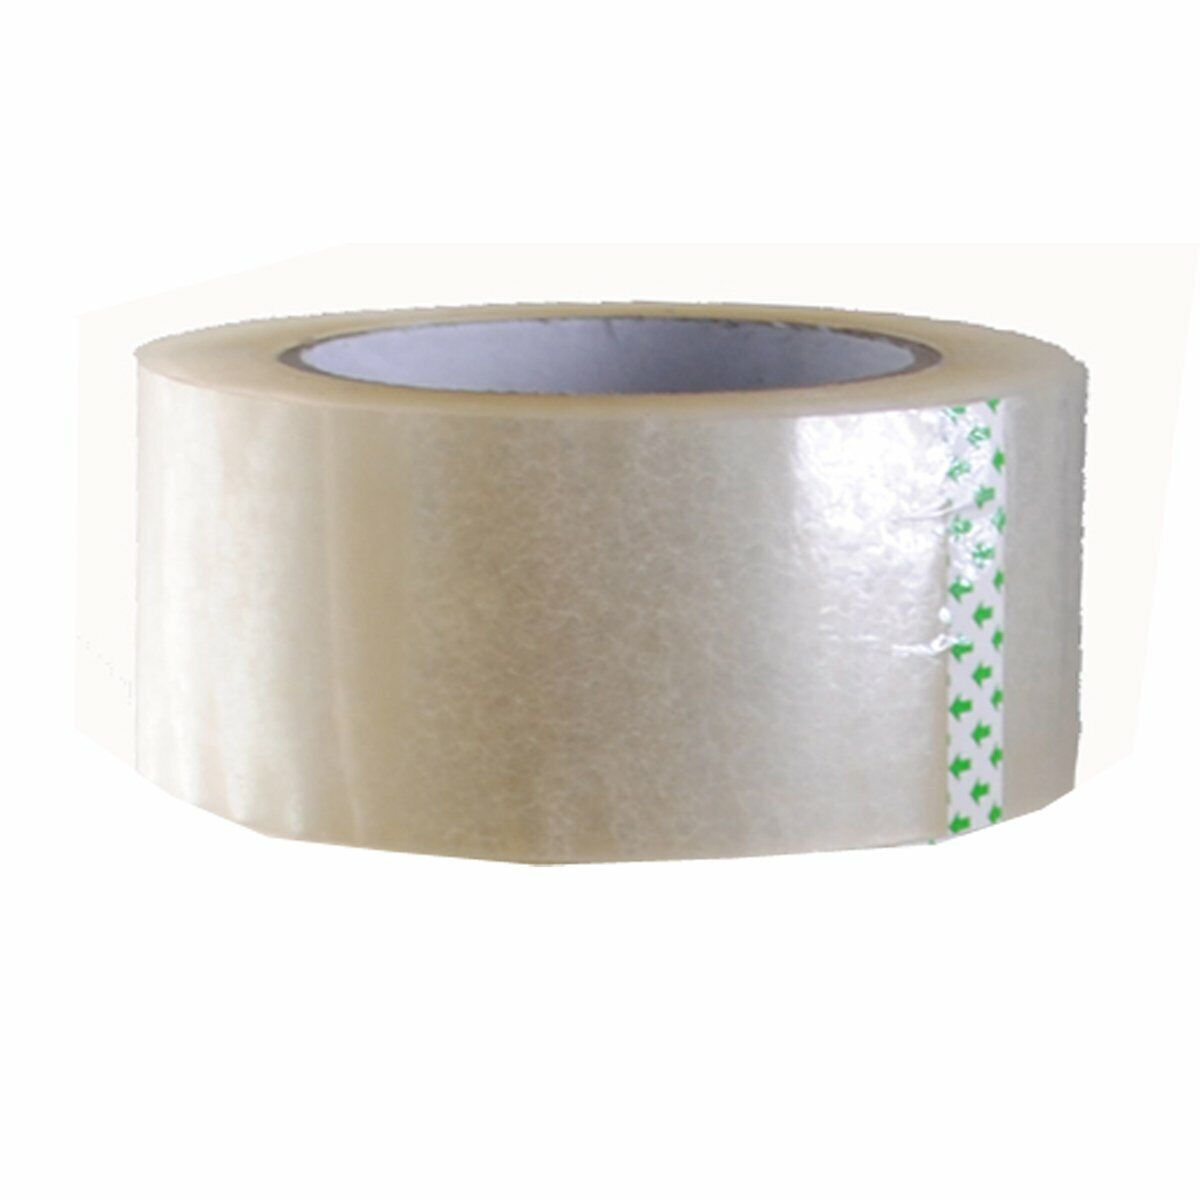 12 Rolls Clear Packing Tape 2.0 Mil Box Shipping Packaging Tape